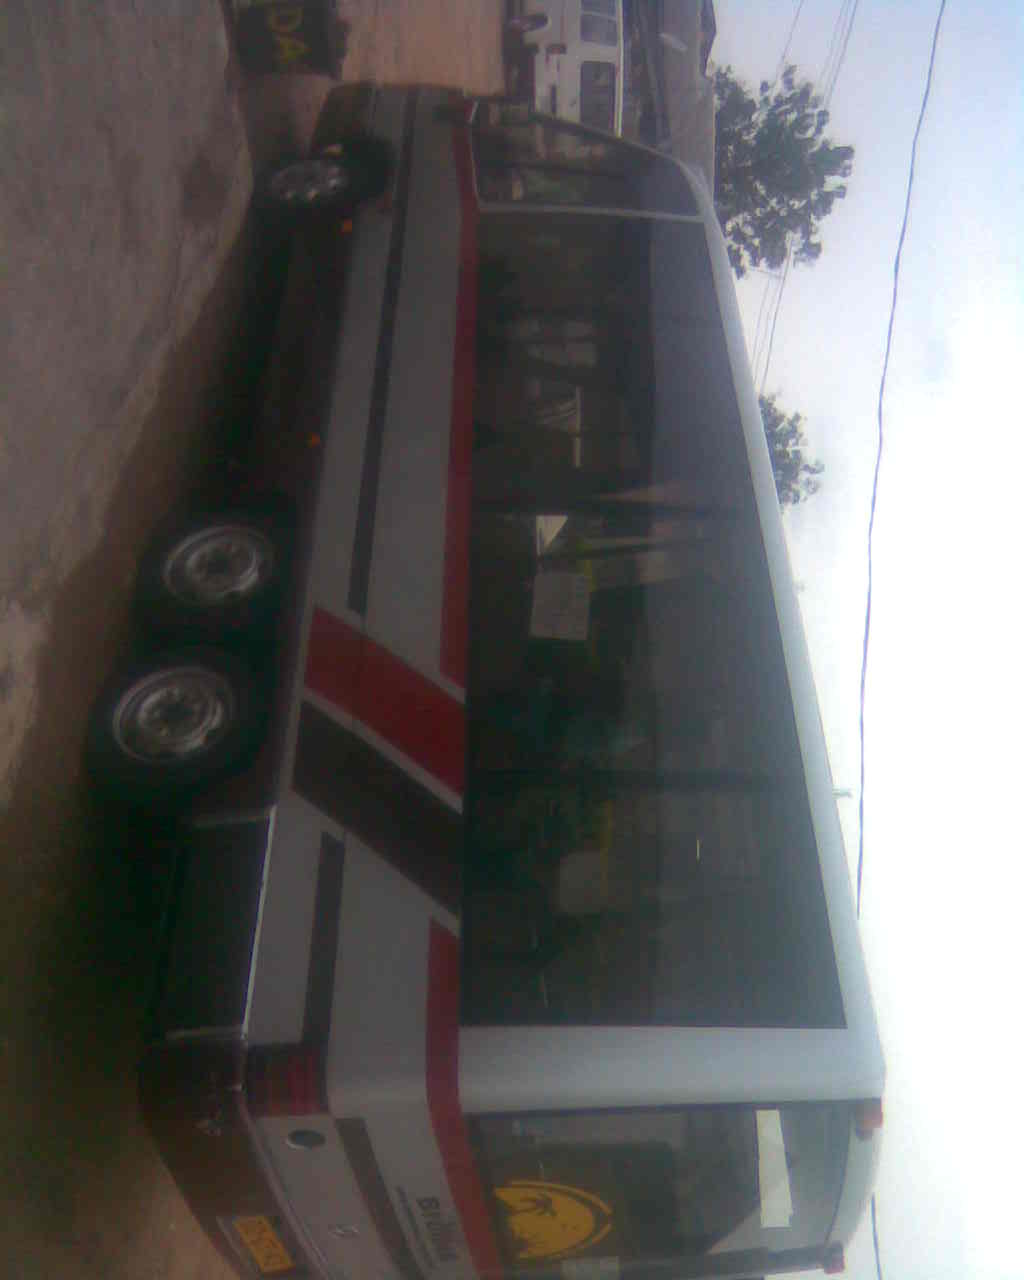 The bus 01